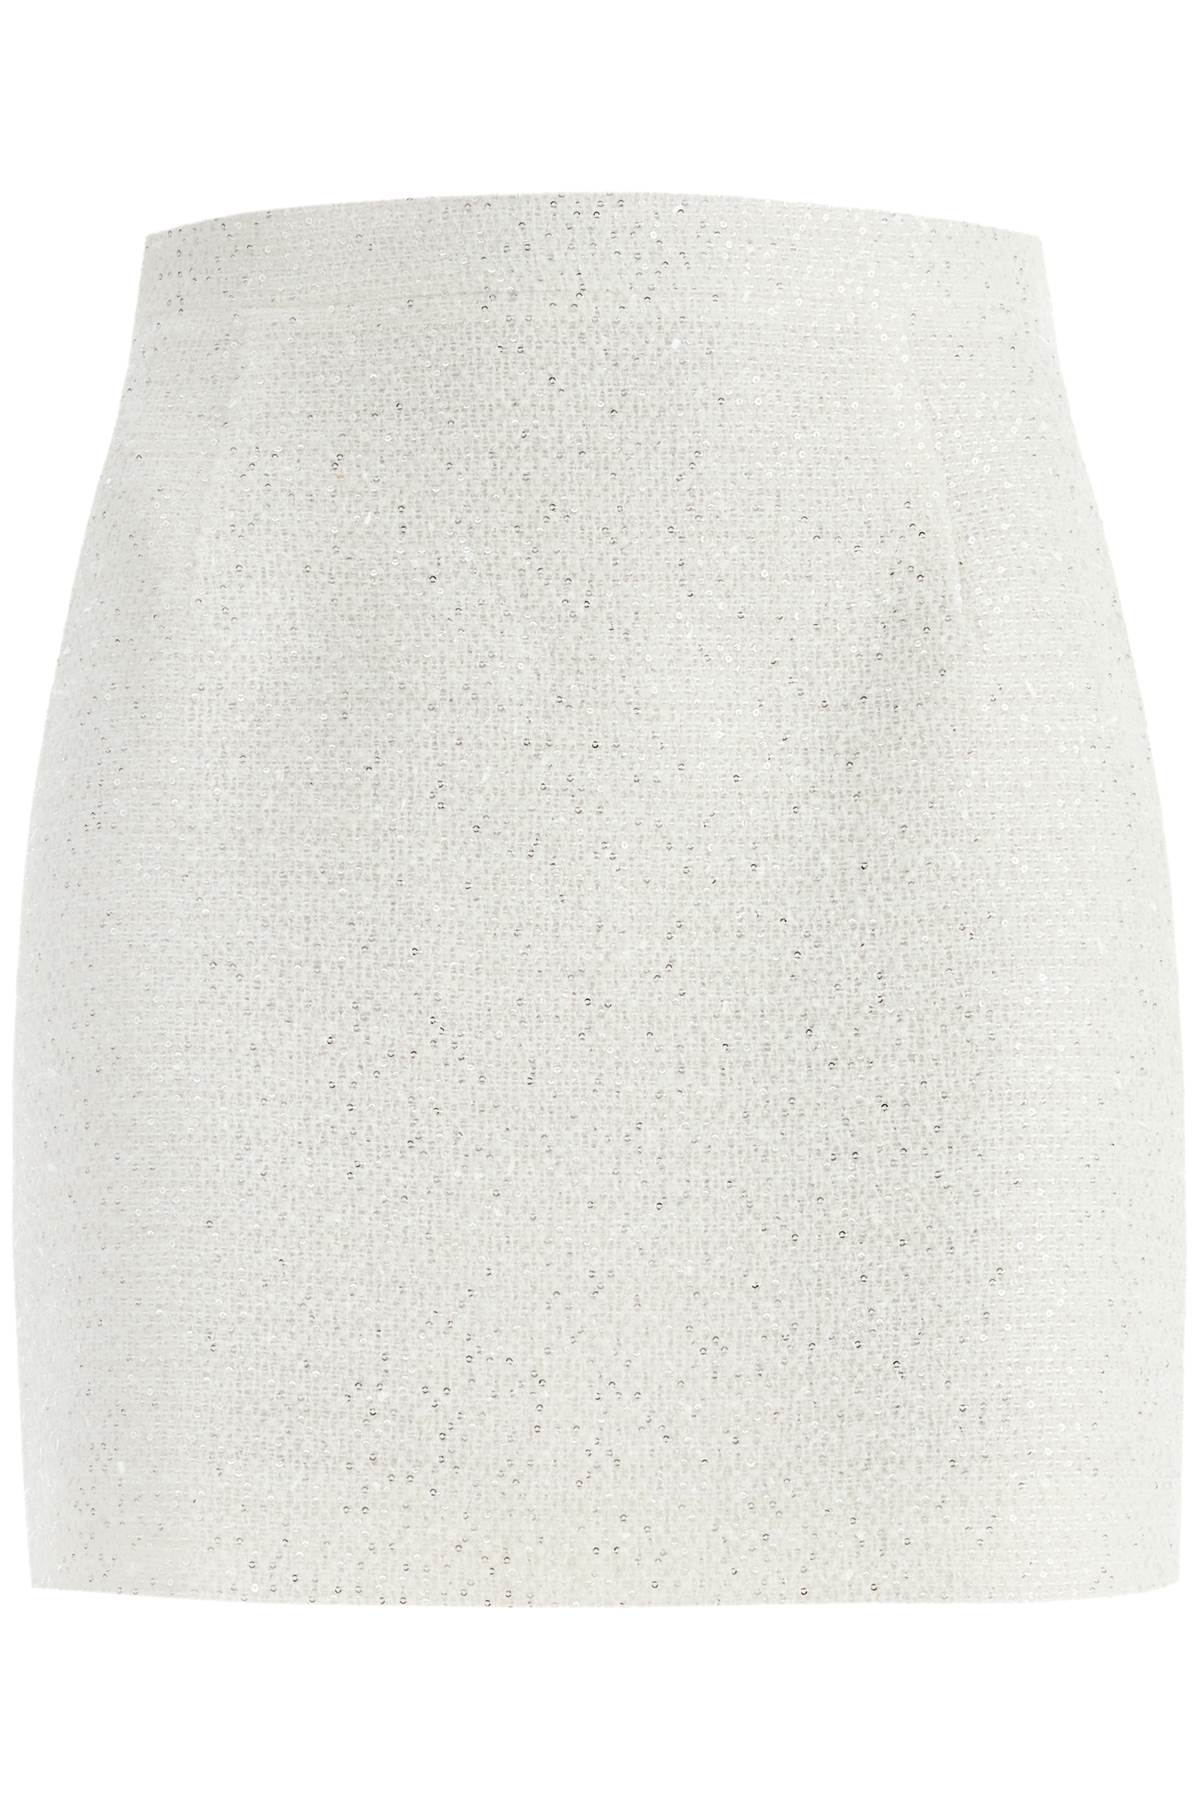 Alessandra Rich ALESSANDRA RICH tweed mini skirt with sequins